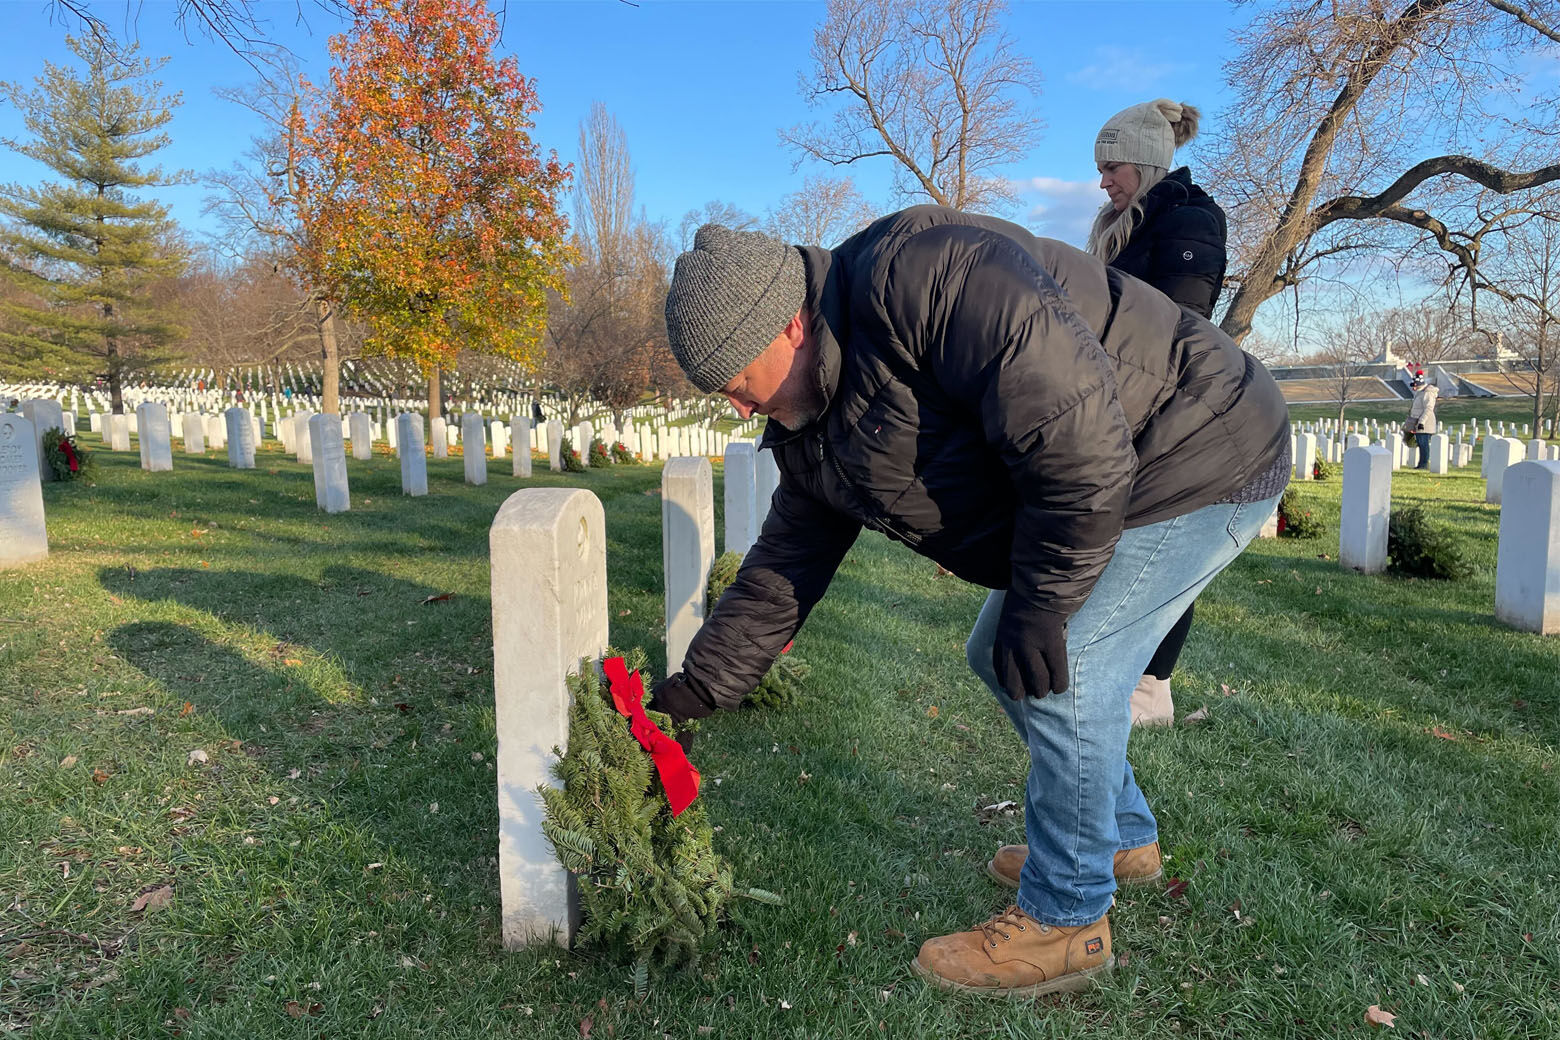 A man lays a wreath on a headstone at Arlington National Cemetery during National Wreaths Across America Day on Dec. 17, 2022.